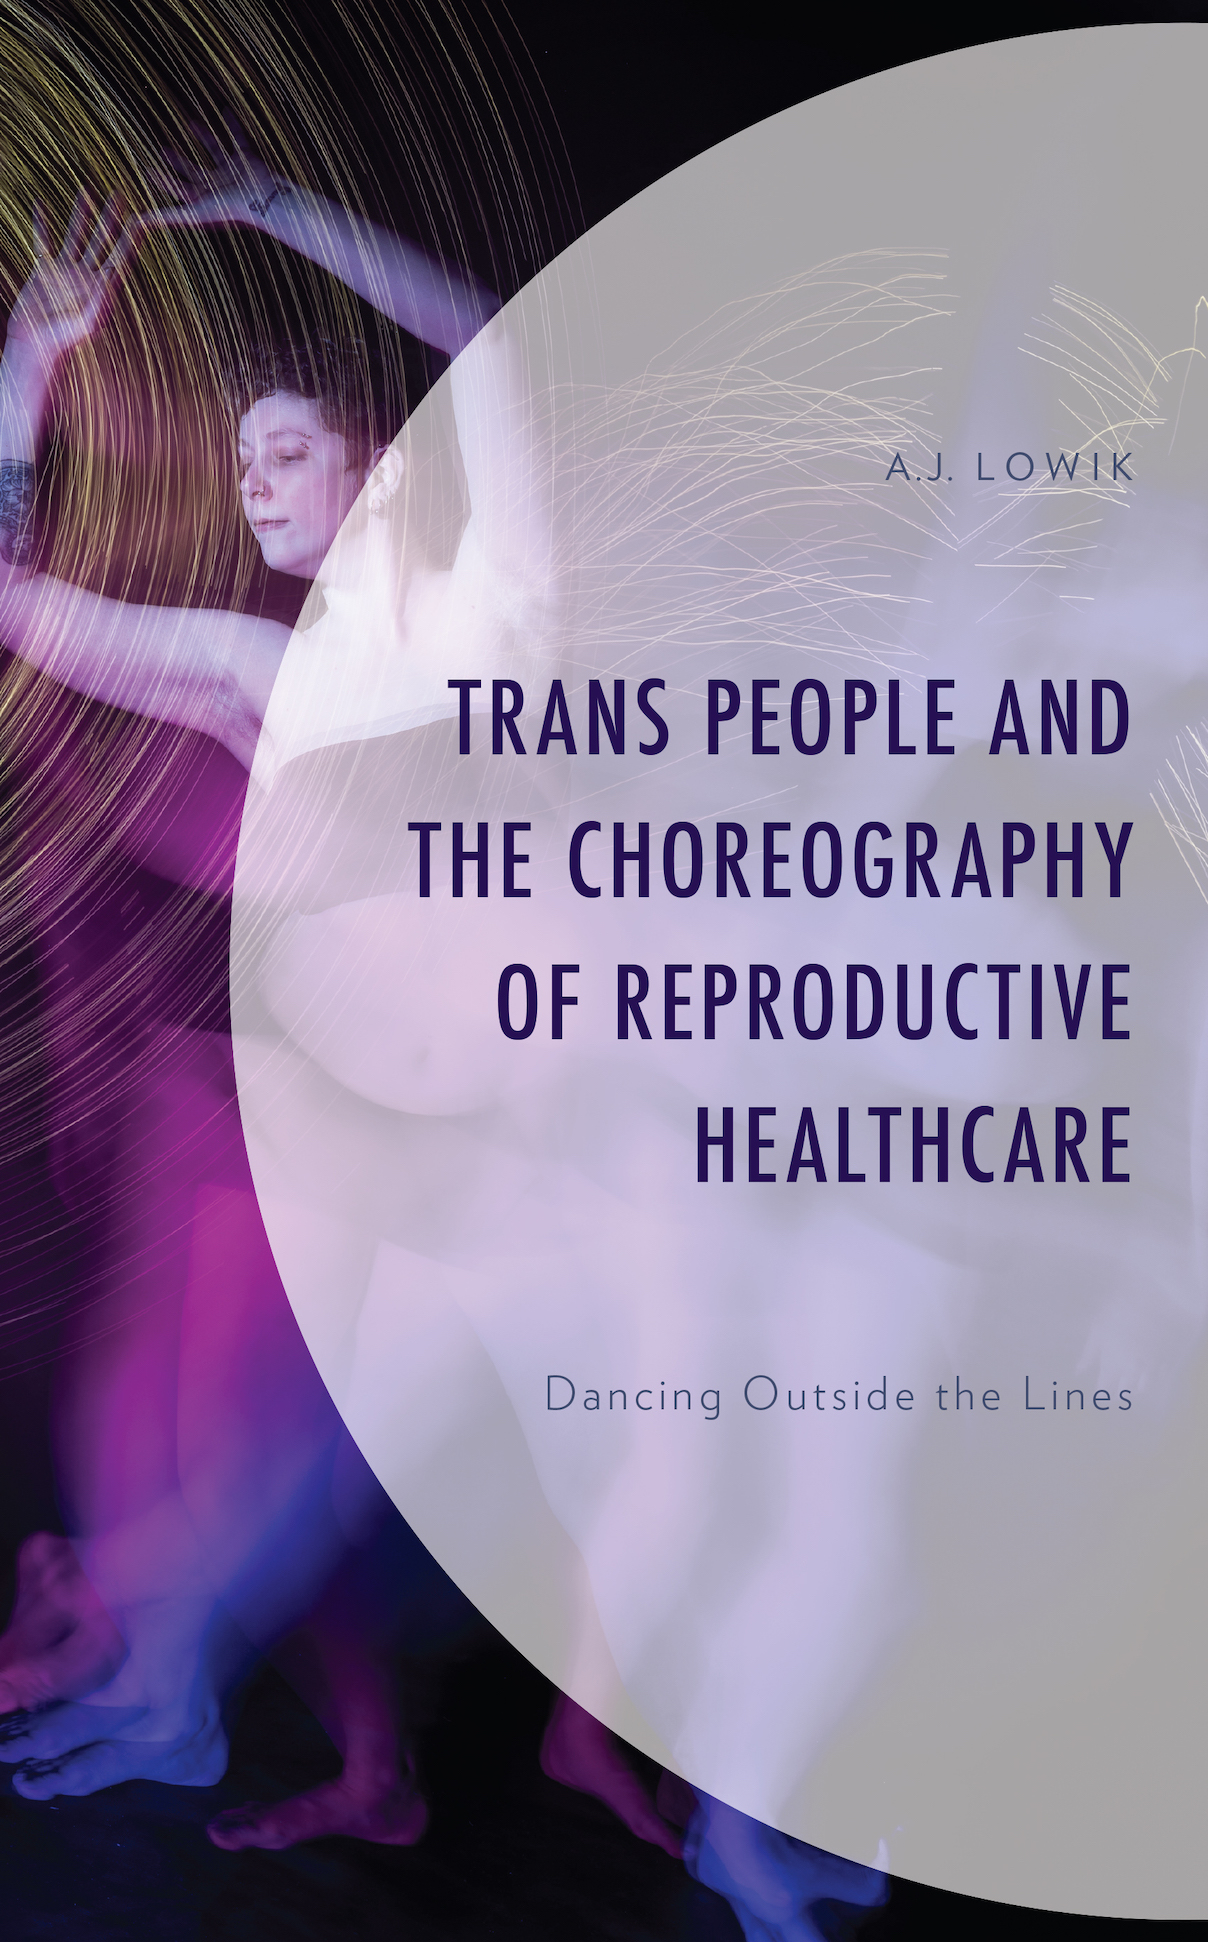 Trans People and the Choreography of Reproductive Healthcare: Dancing Outside the Lines by Dr. A.J. Lowik, postdoctoral fellow at the UBC Faculty of Medicine and Centre for Gender and Sexual Health Equity.